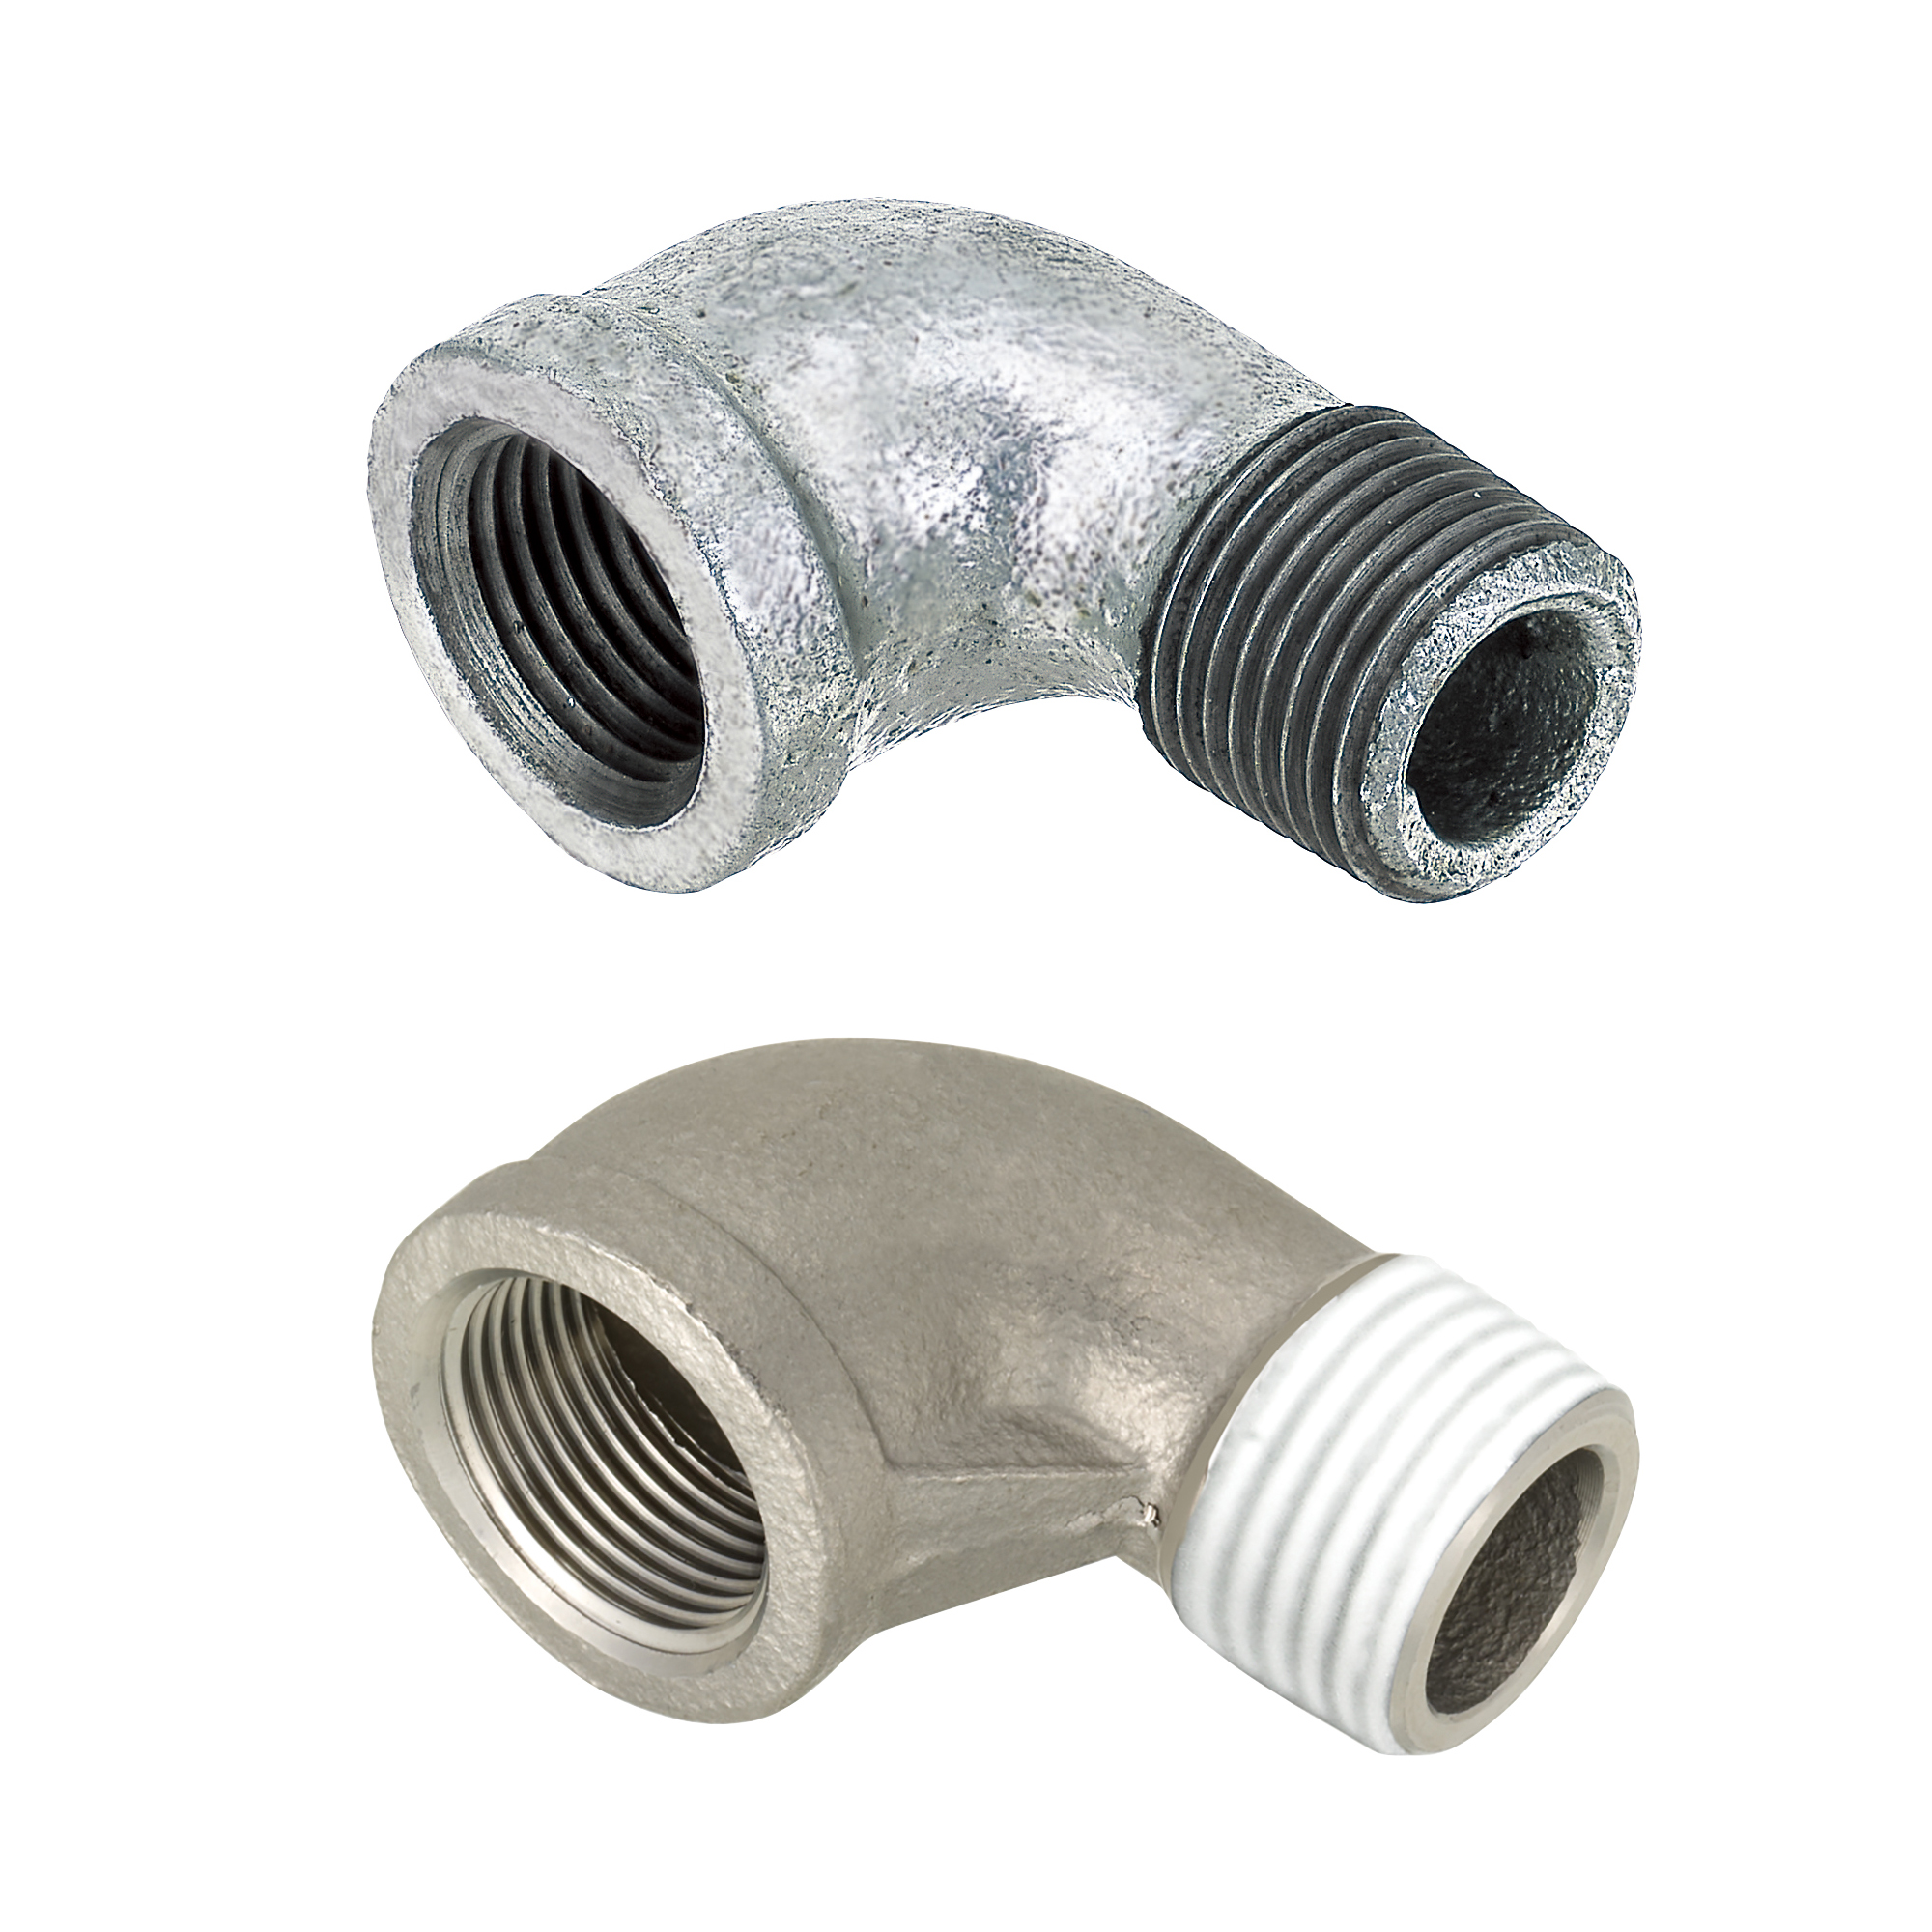 Low Pressure Fittings/90 Deg. Elbow/Threaded and Tapped (SUTPEL32A) 